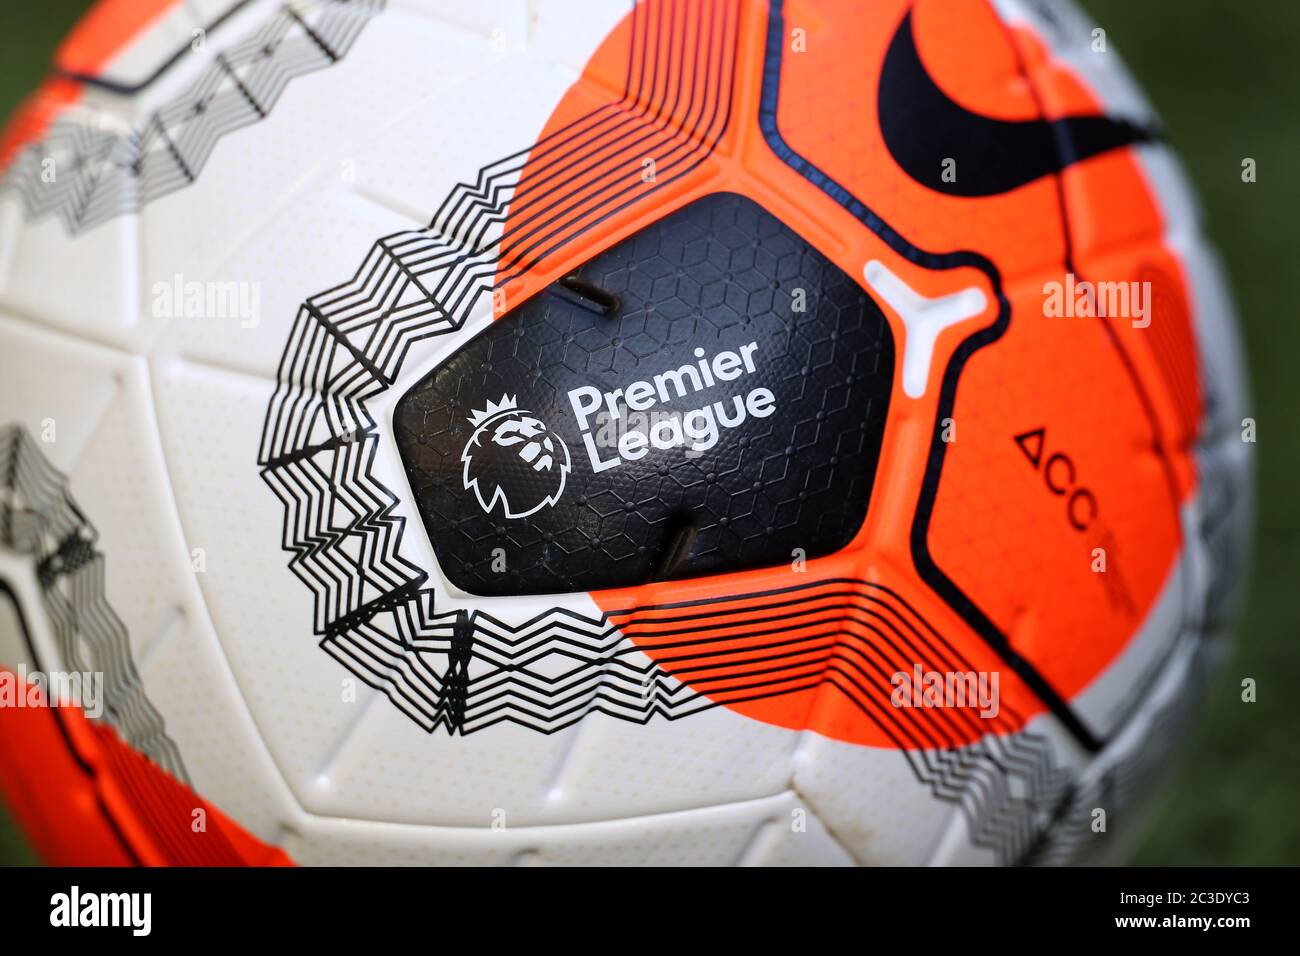 The Nike Merlin match ball during the Premier League match at Carrow Road,  Norwich Stock Photo - Alamy